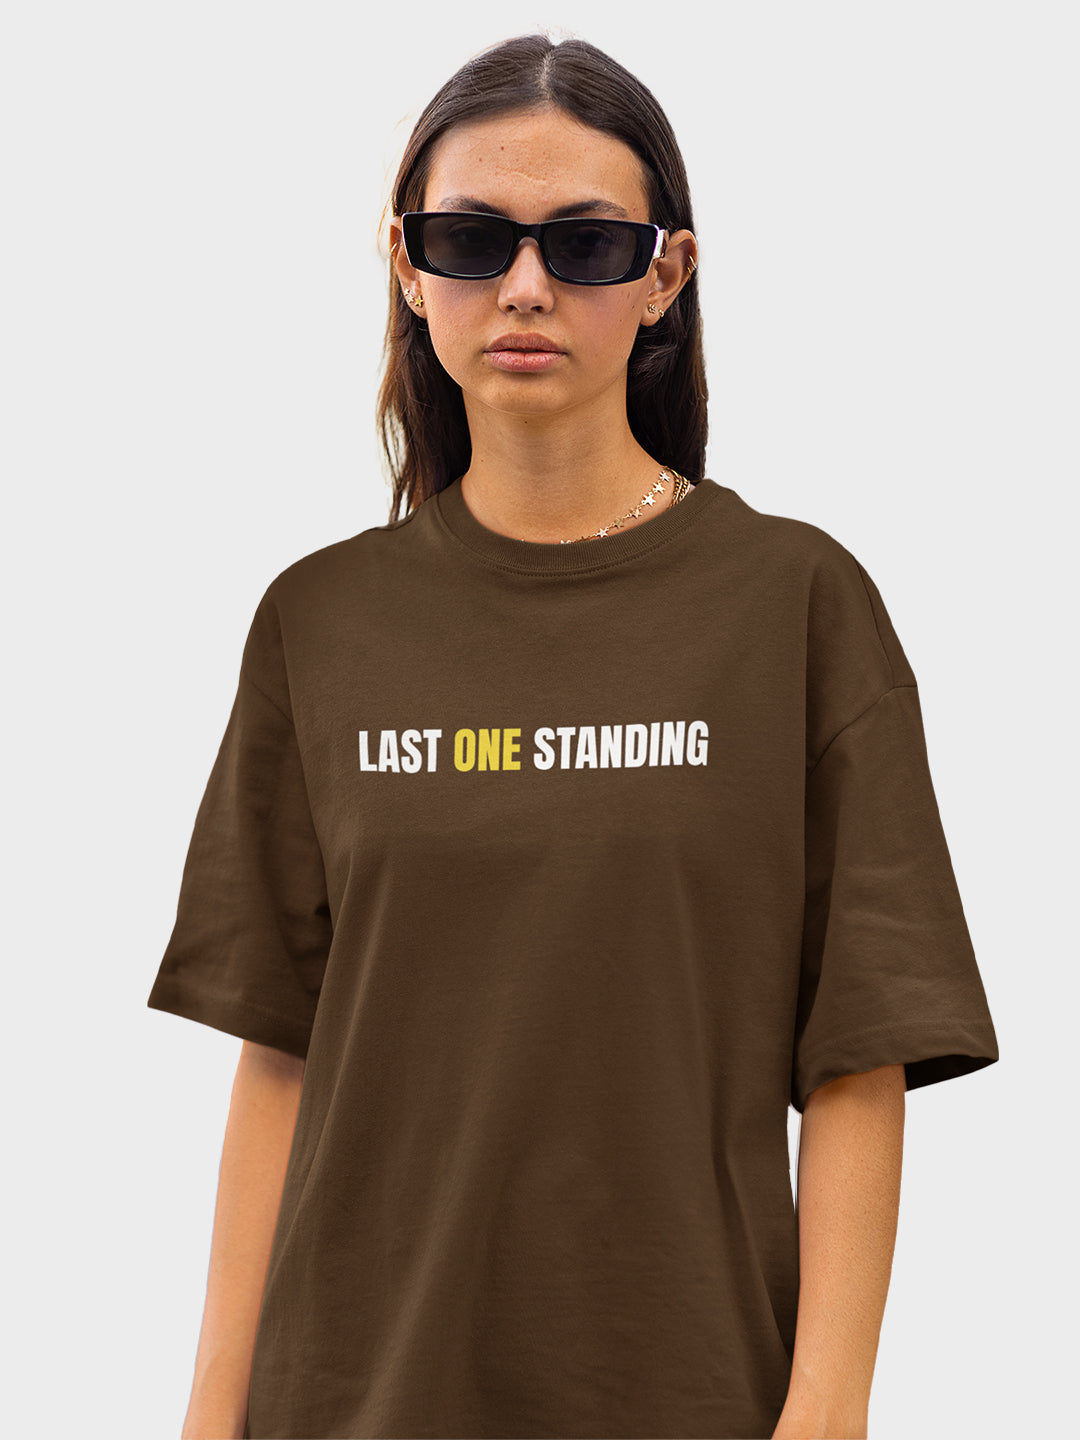 The Last One Standing T-Shirt